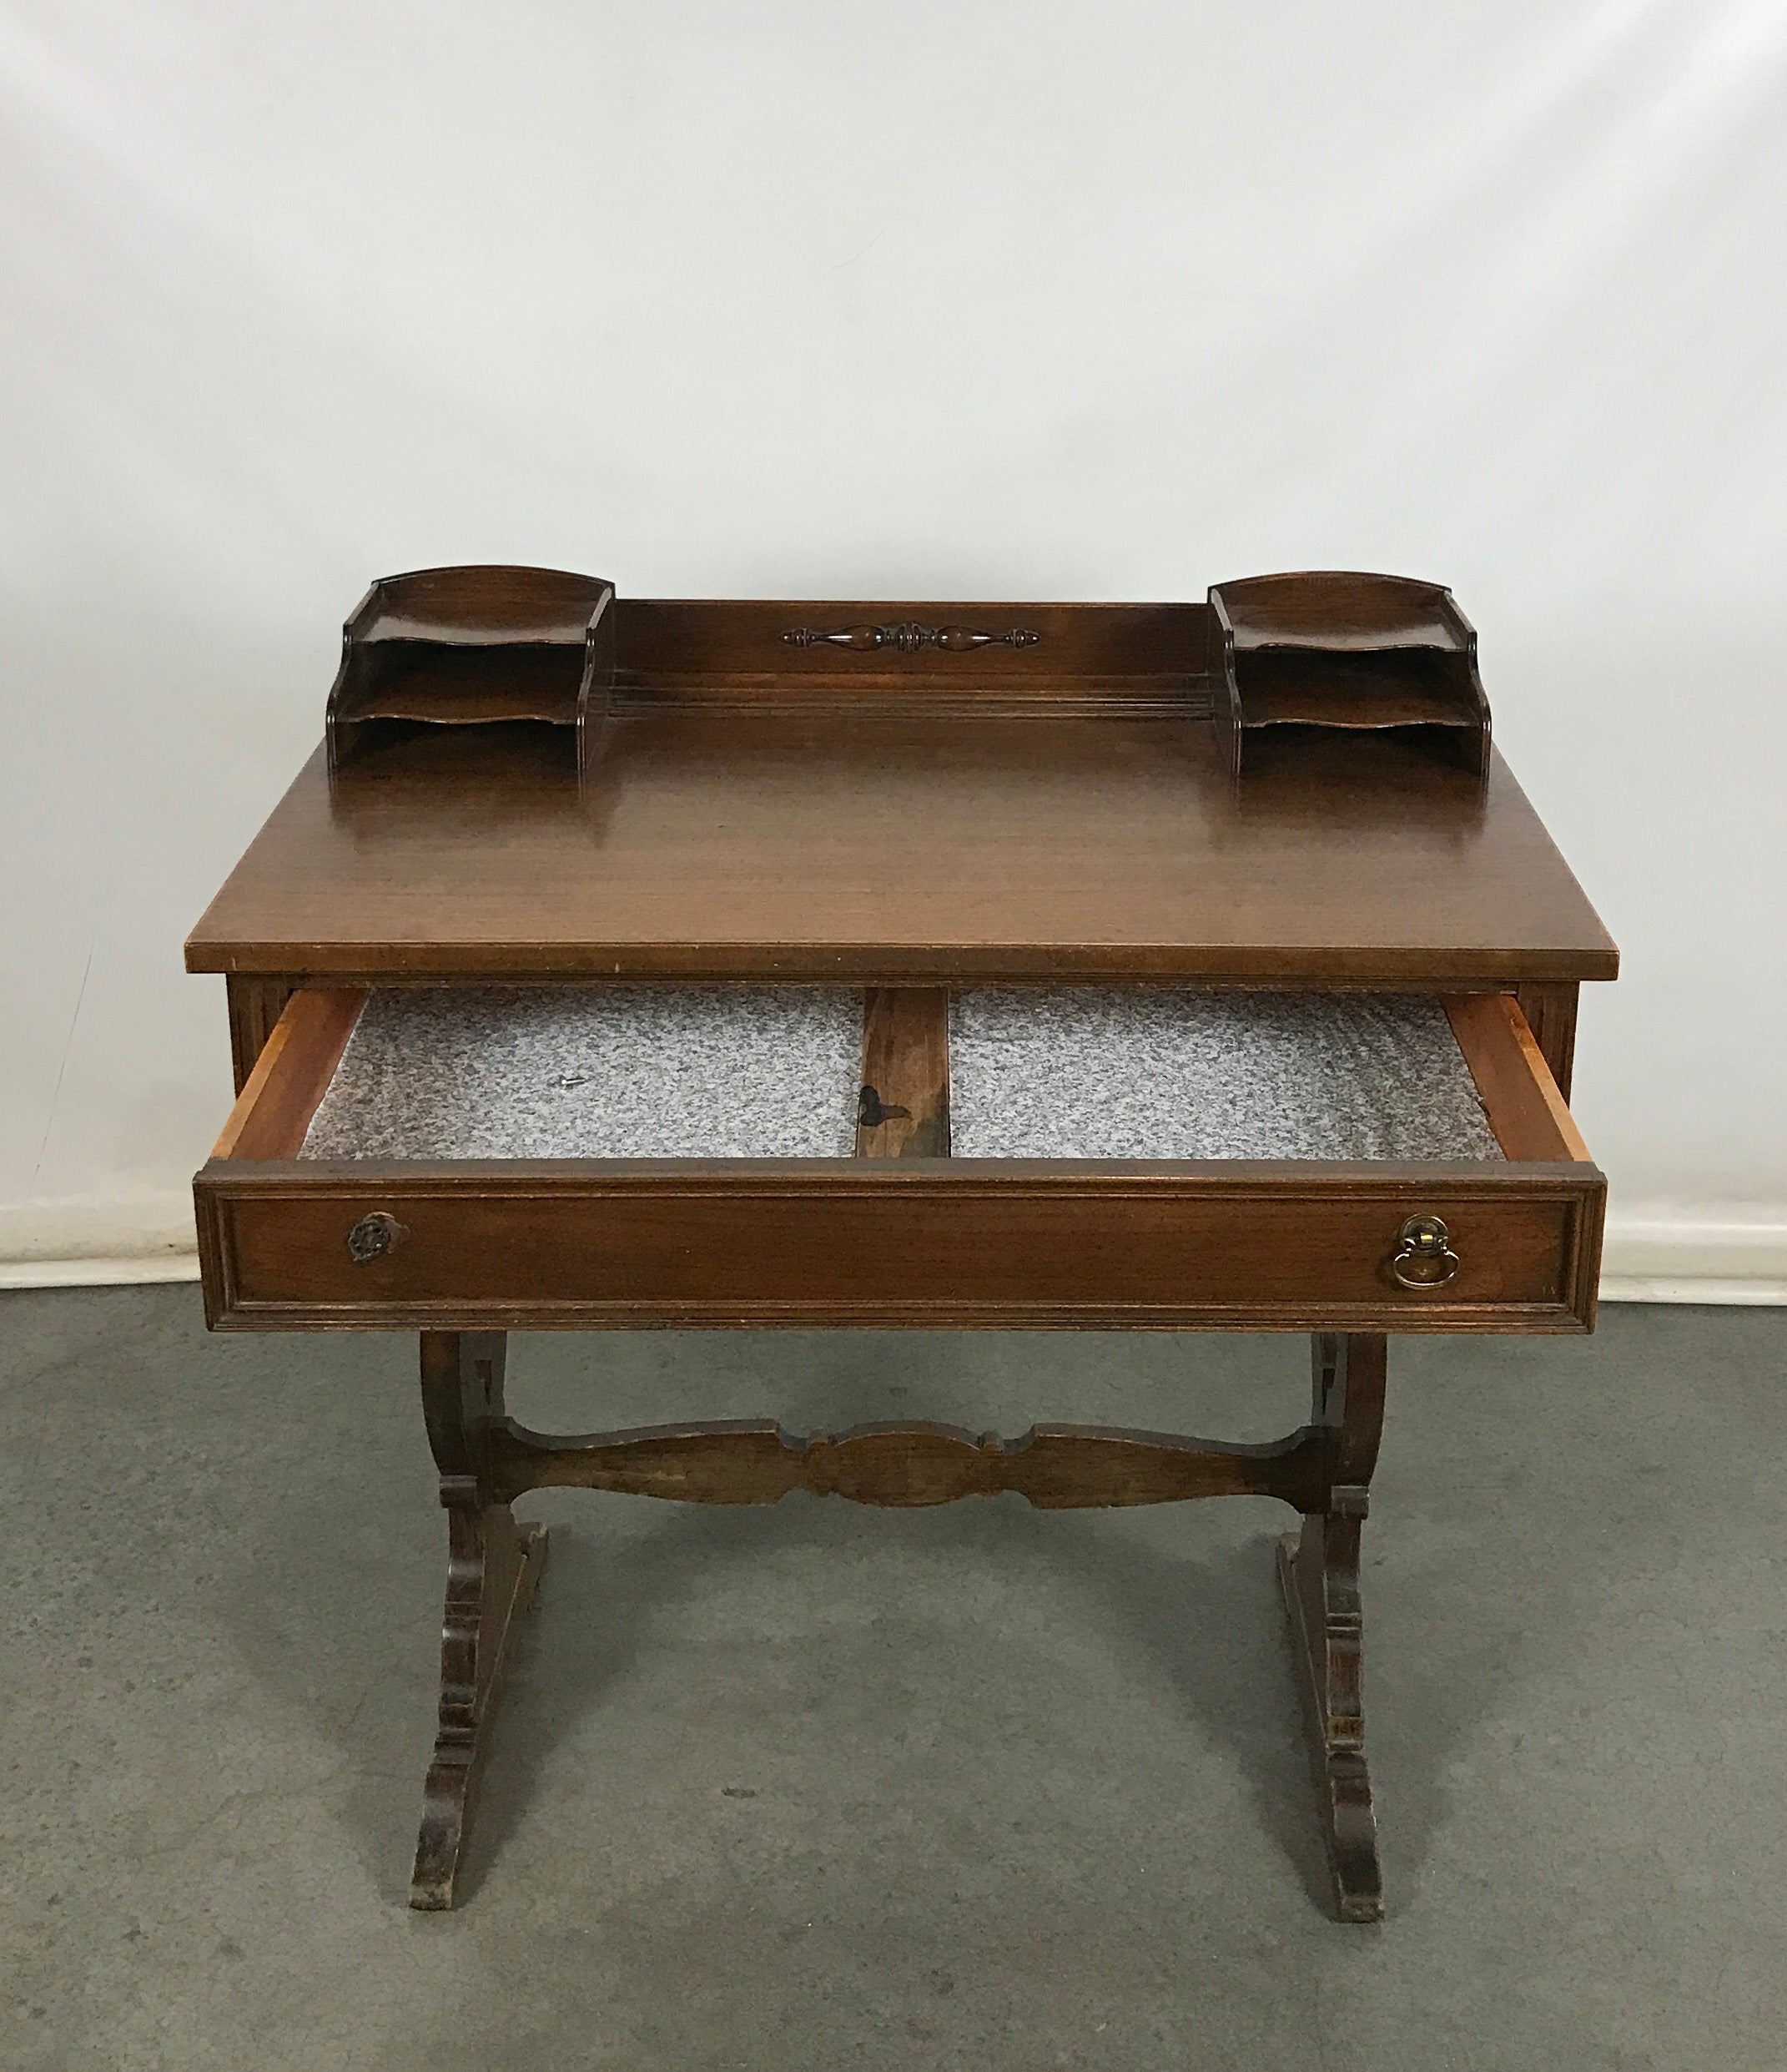 Wooden Desk with Bench